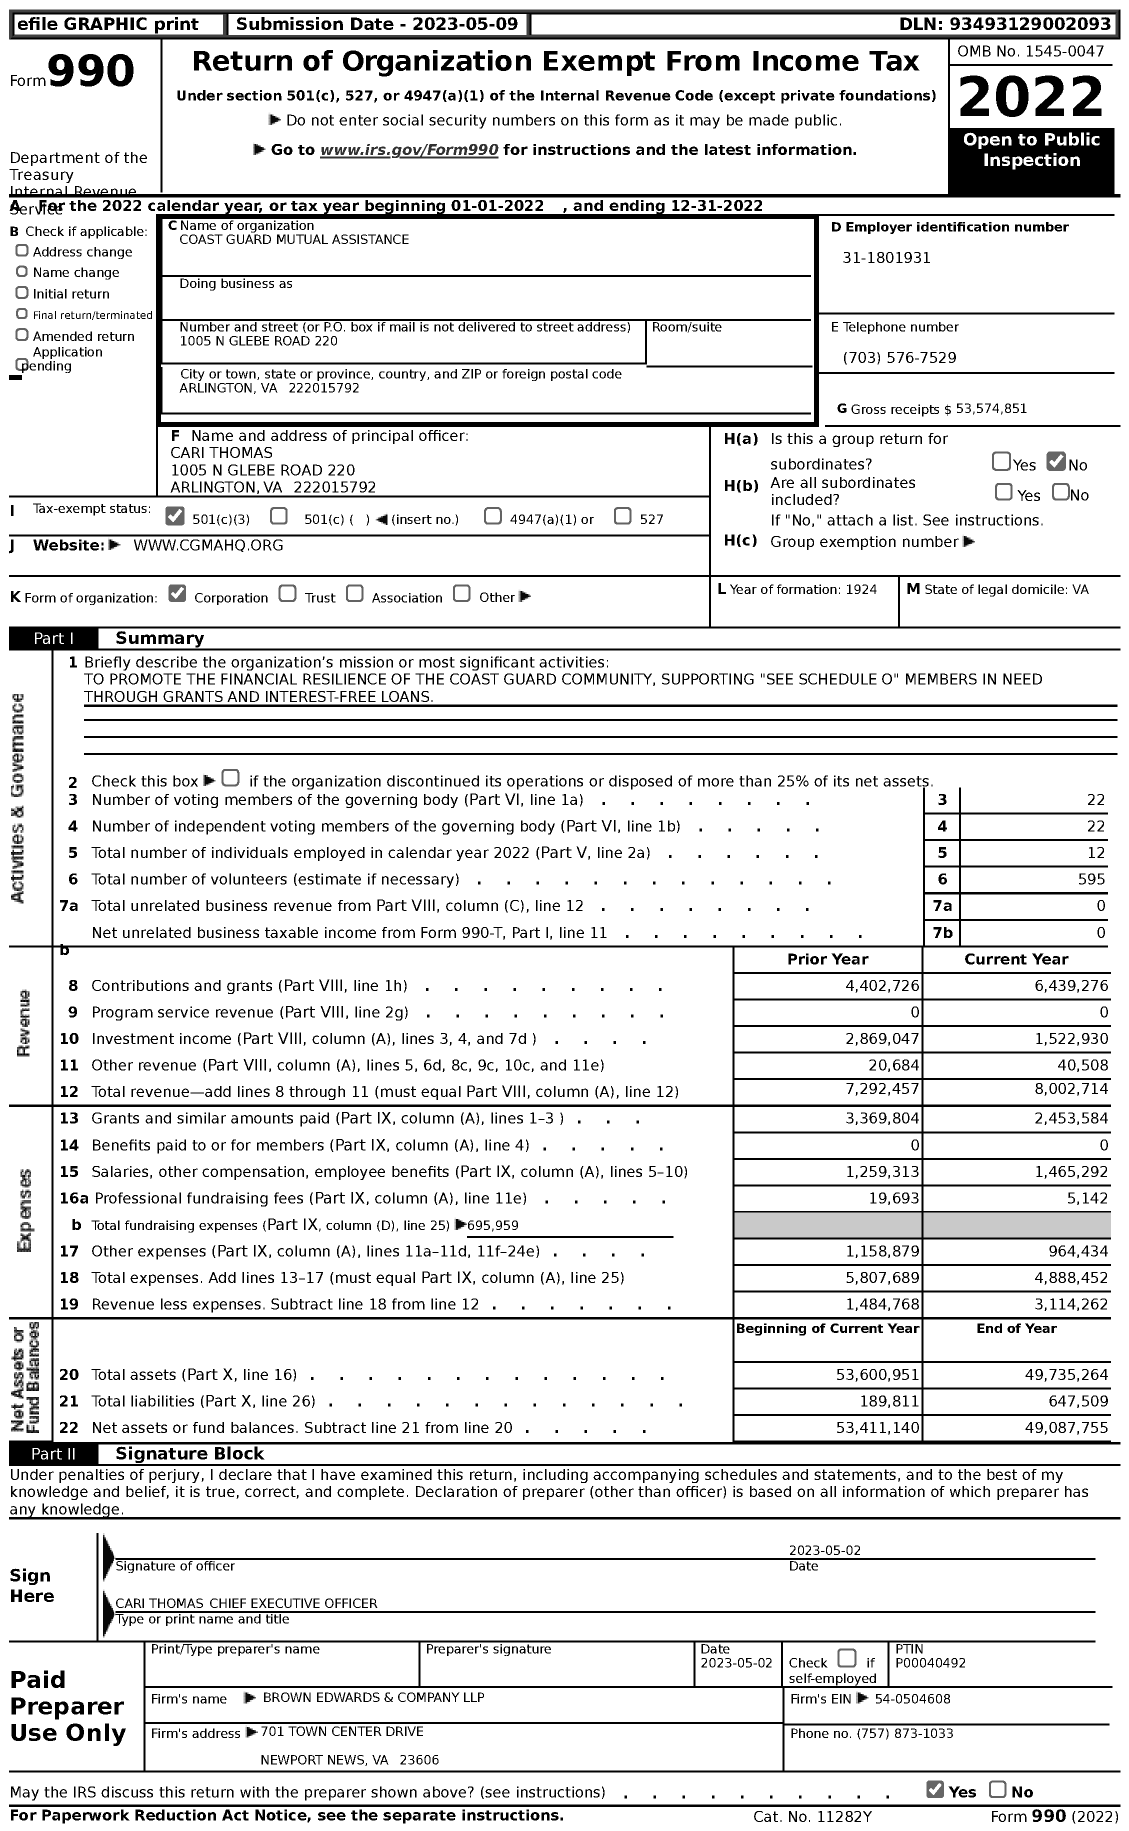 Image of first page of 2022 Form 990 for Coast Guard Mutual Assistance (CGMA)